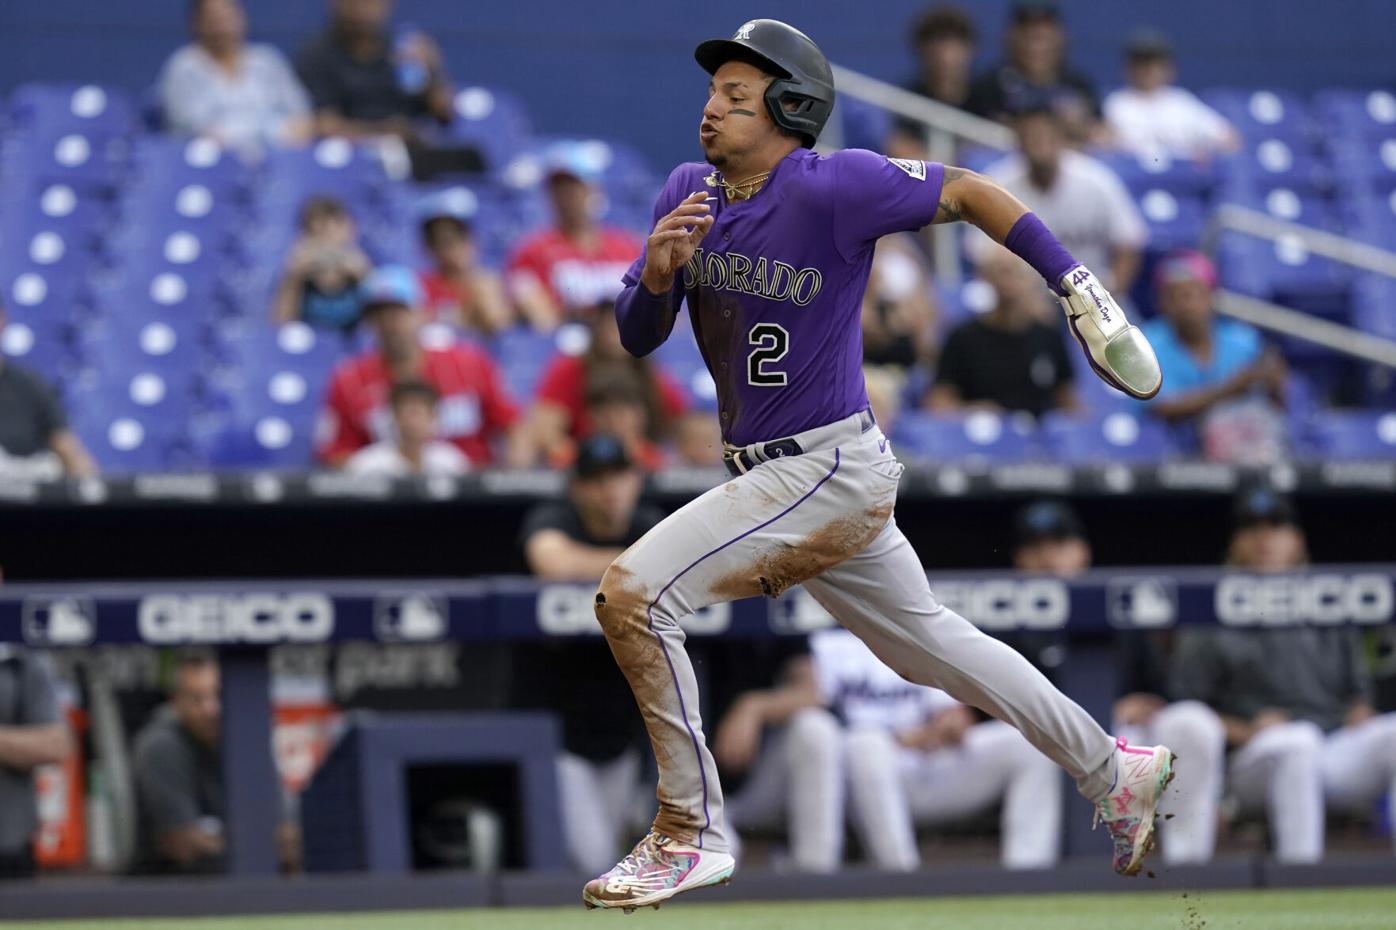 Colorado Rockies news: Yonathan Daza is seizing his opportunity in